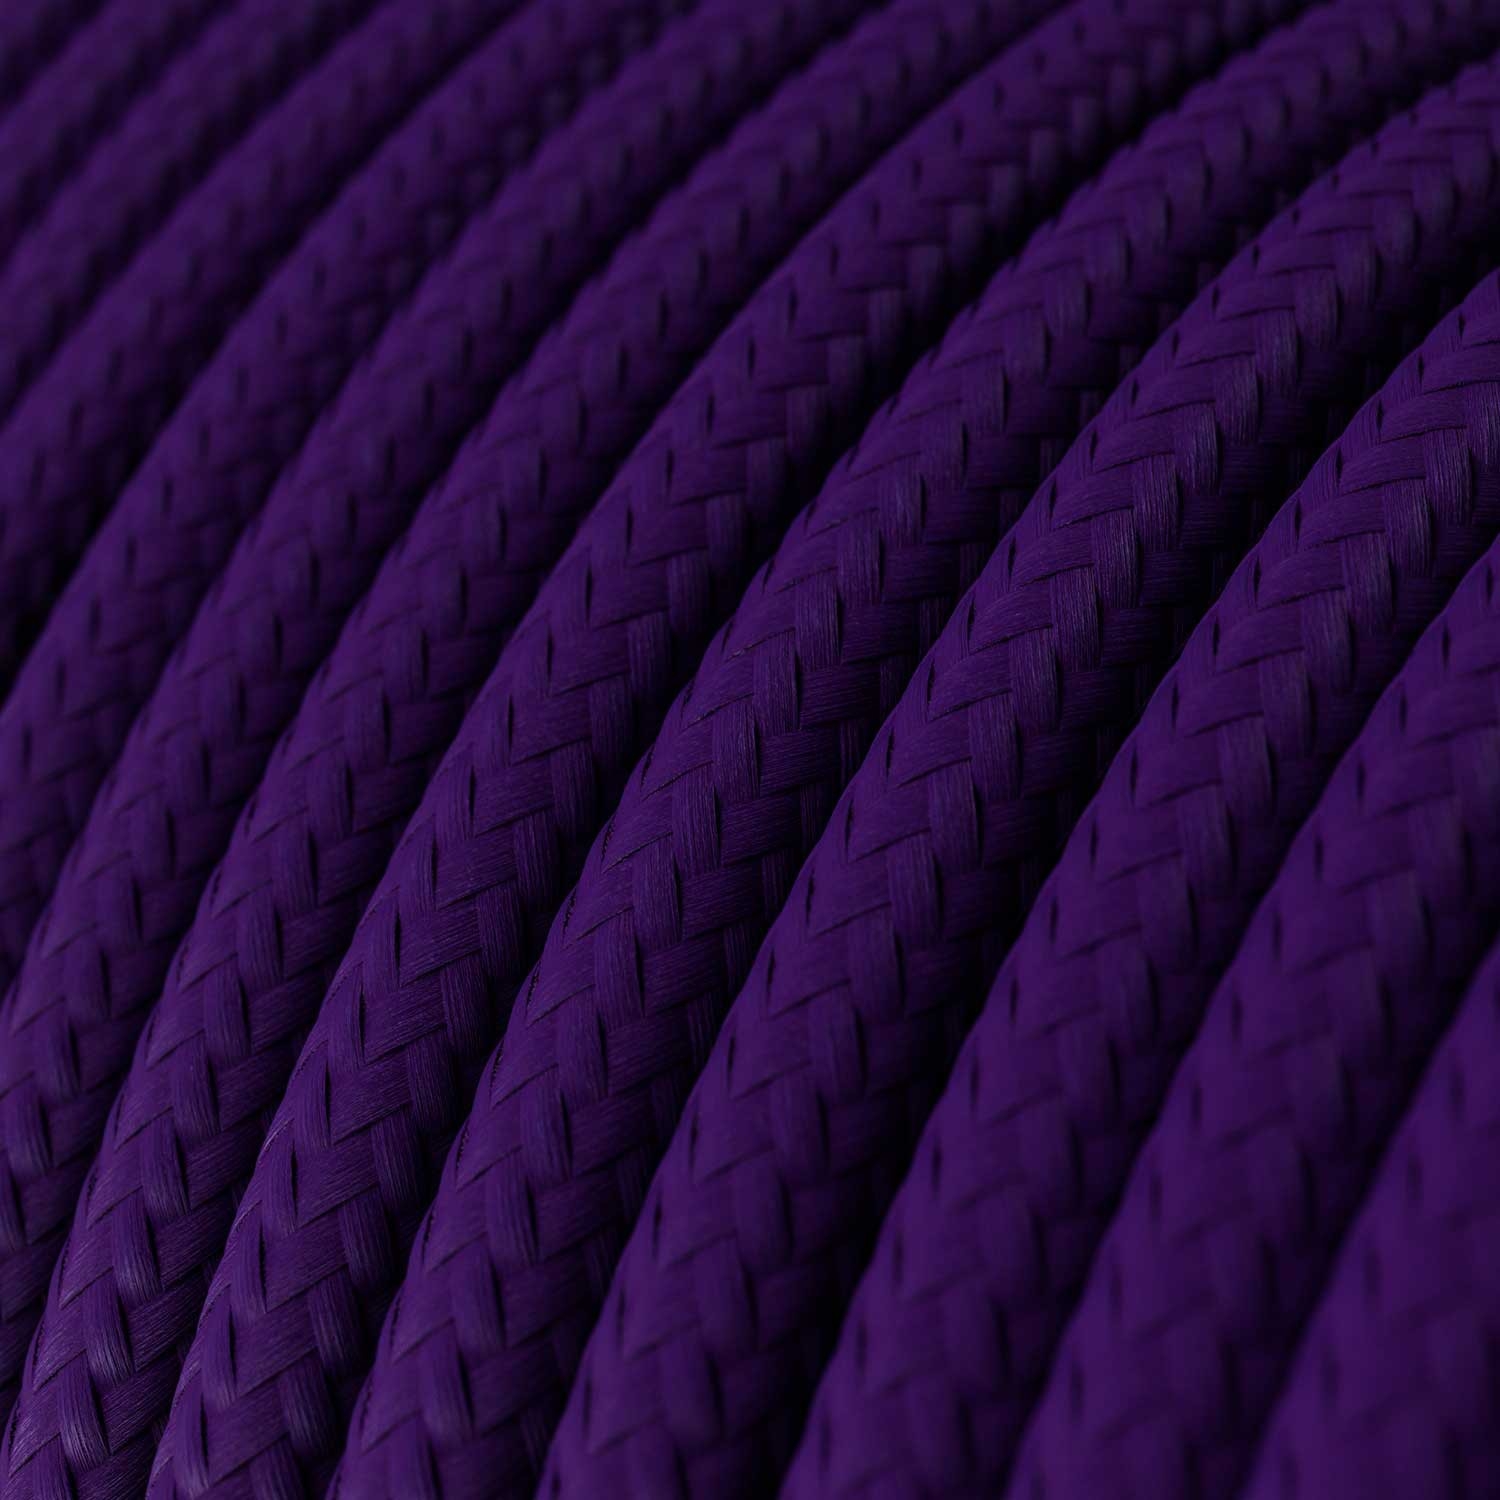 RM14 Violet Round Rayon Electrical Fabric Cloth Cord Cable